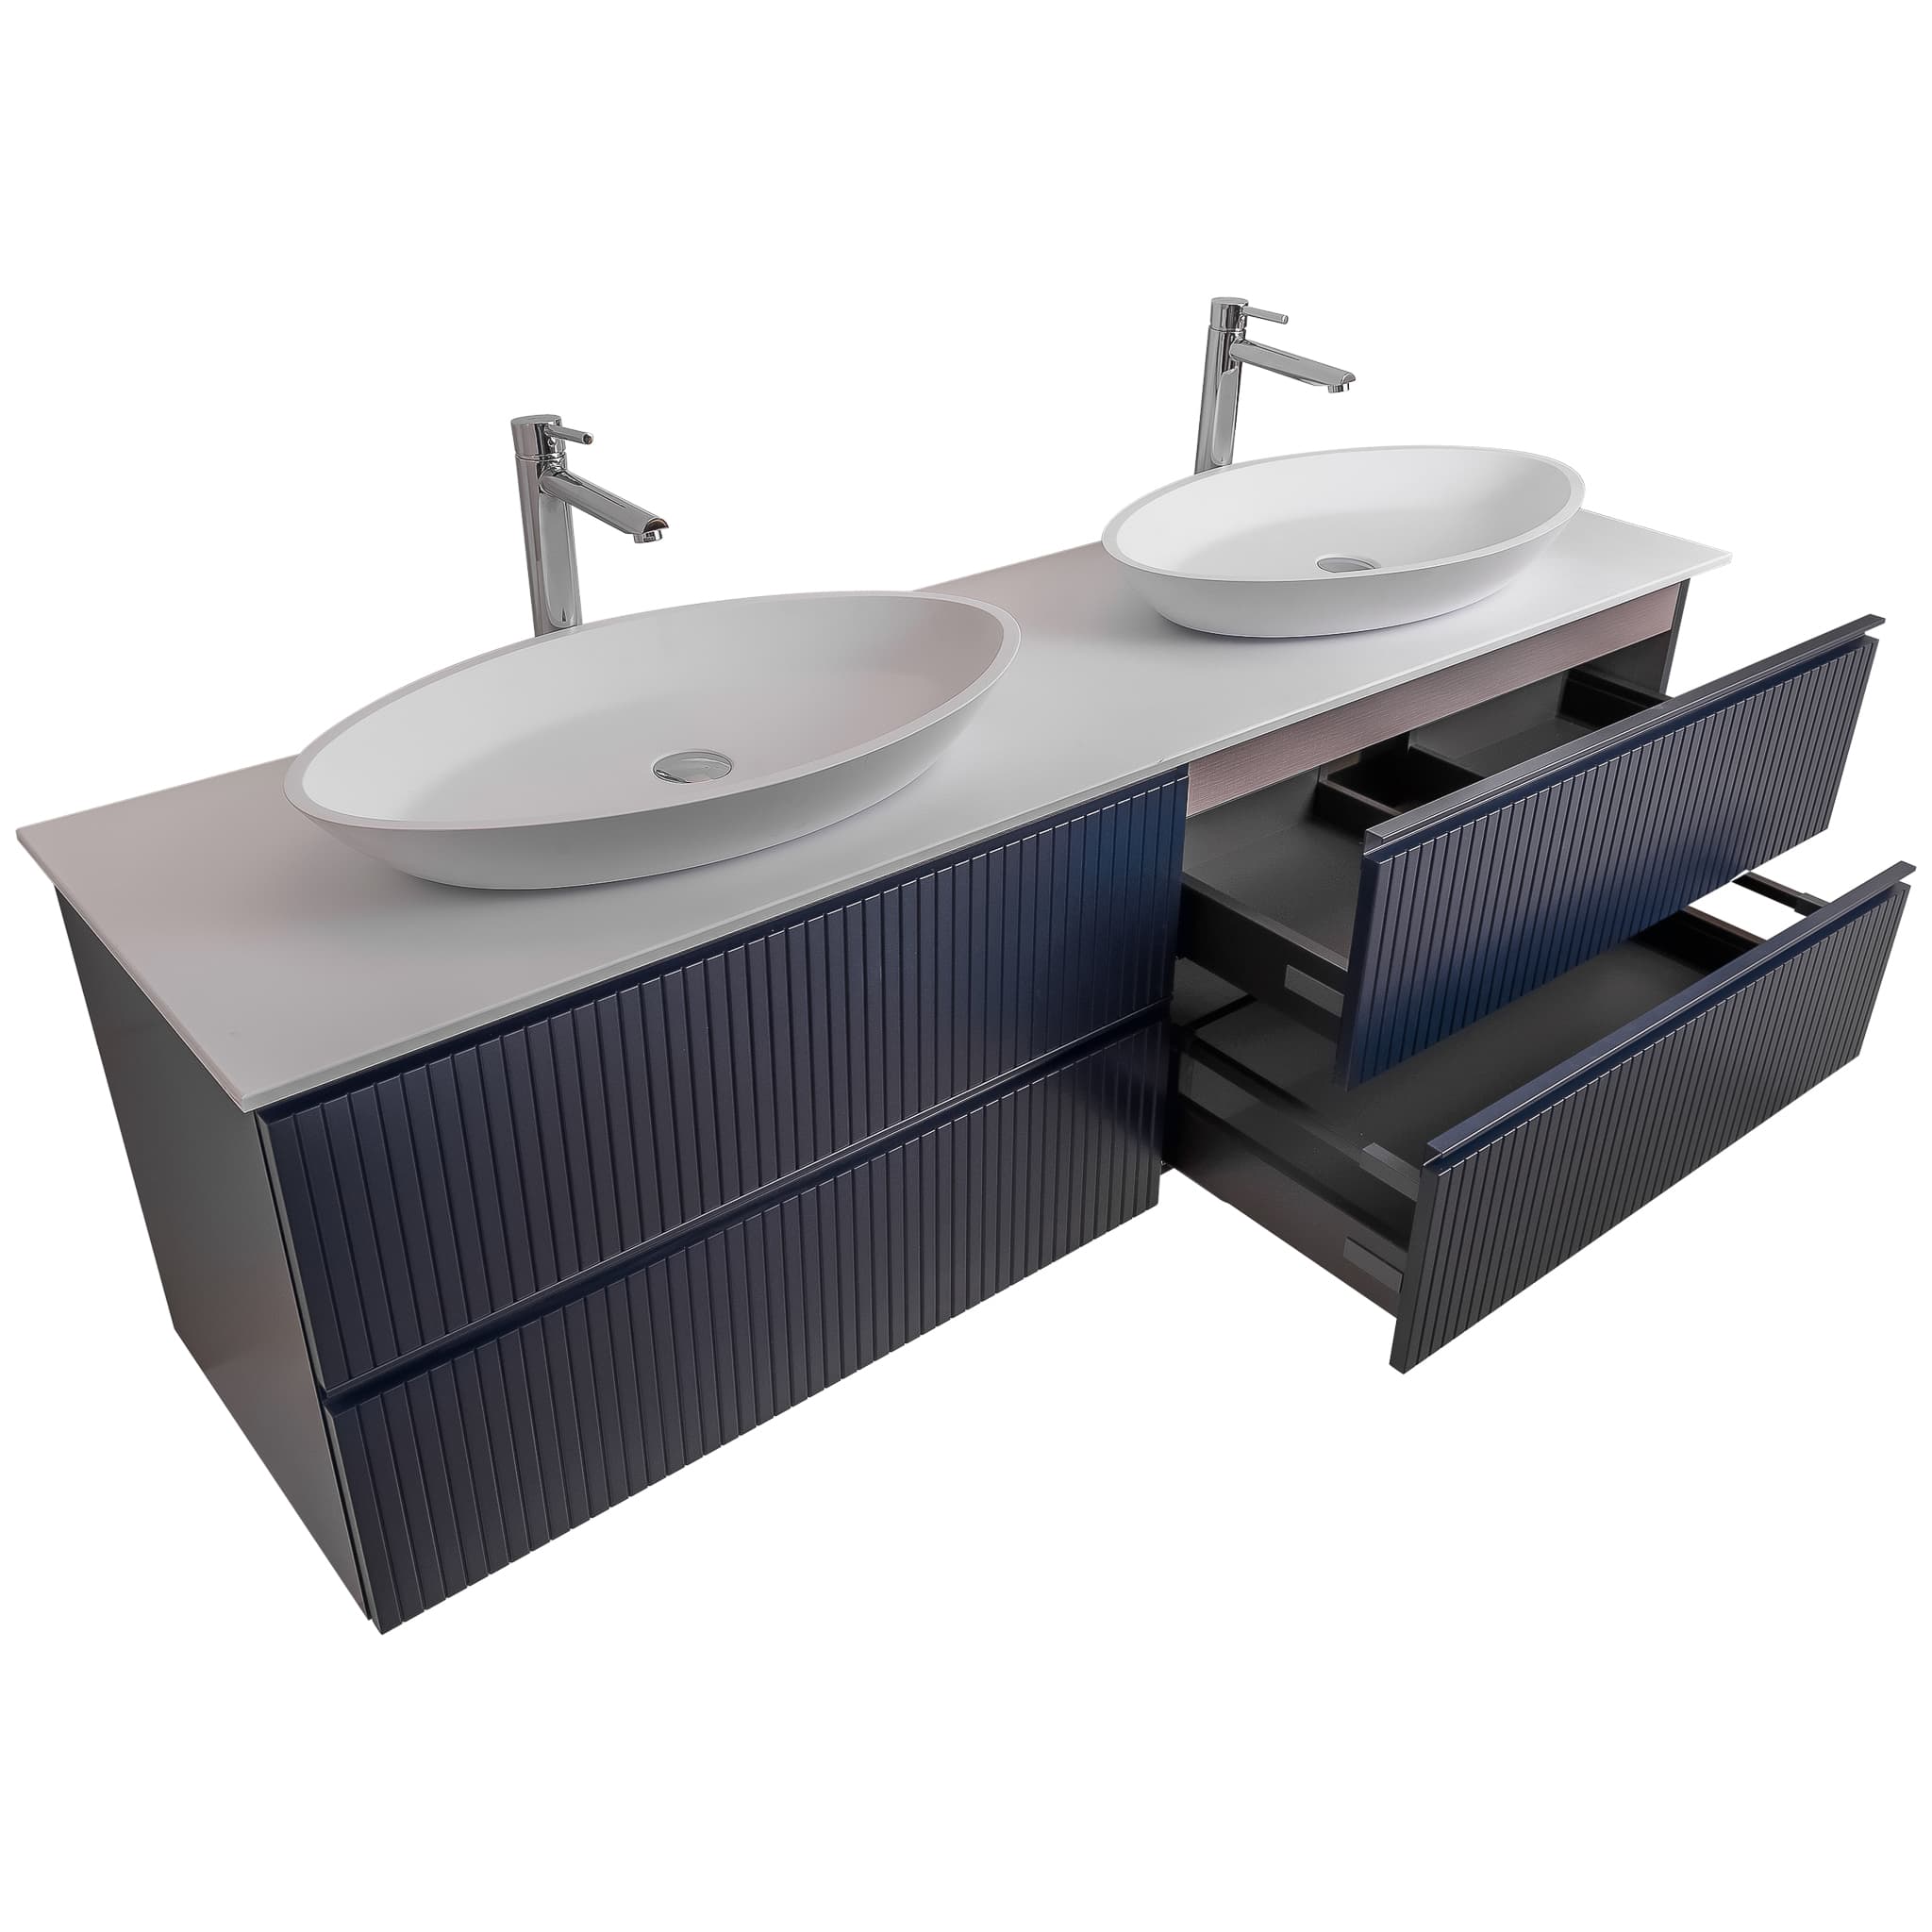 Ares 63 Matte Navy Blue Cabinet, Solid Surface Flat White Counter And Two Oval Solid Surface White Basin 1305, Wall Mounted Modern Vanity Set